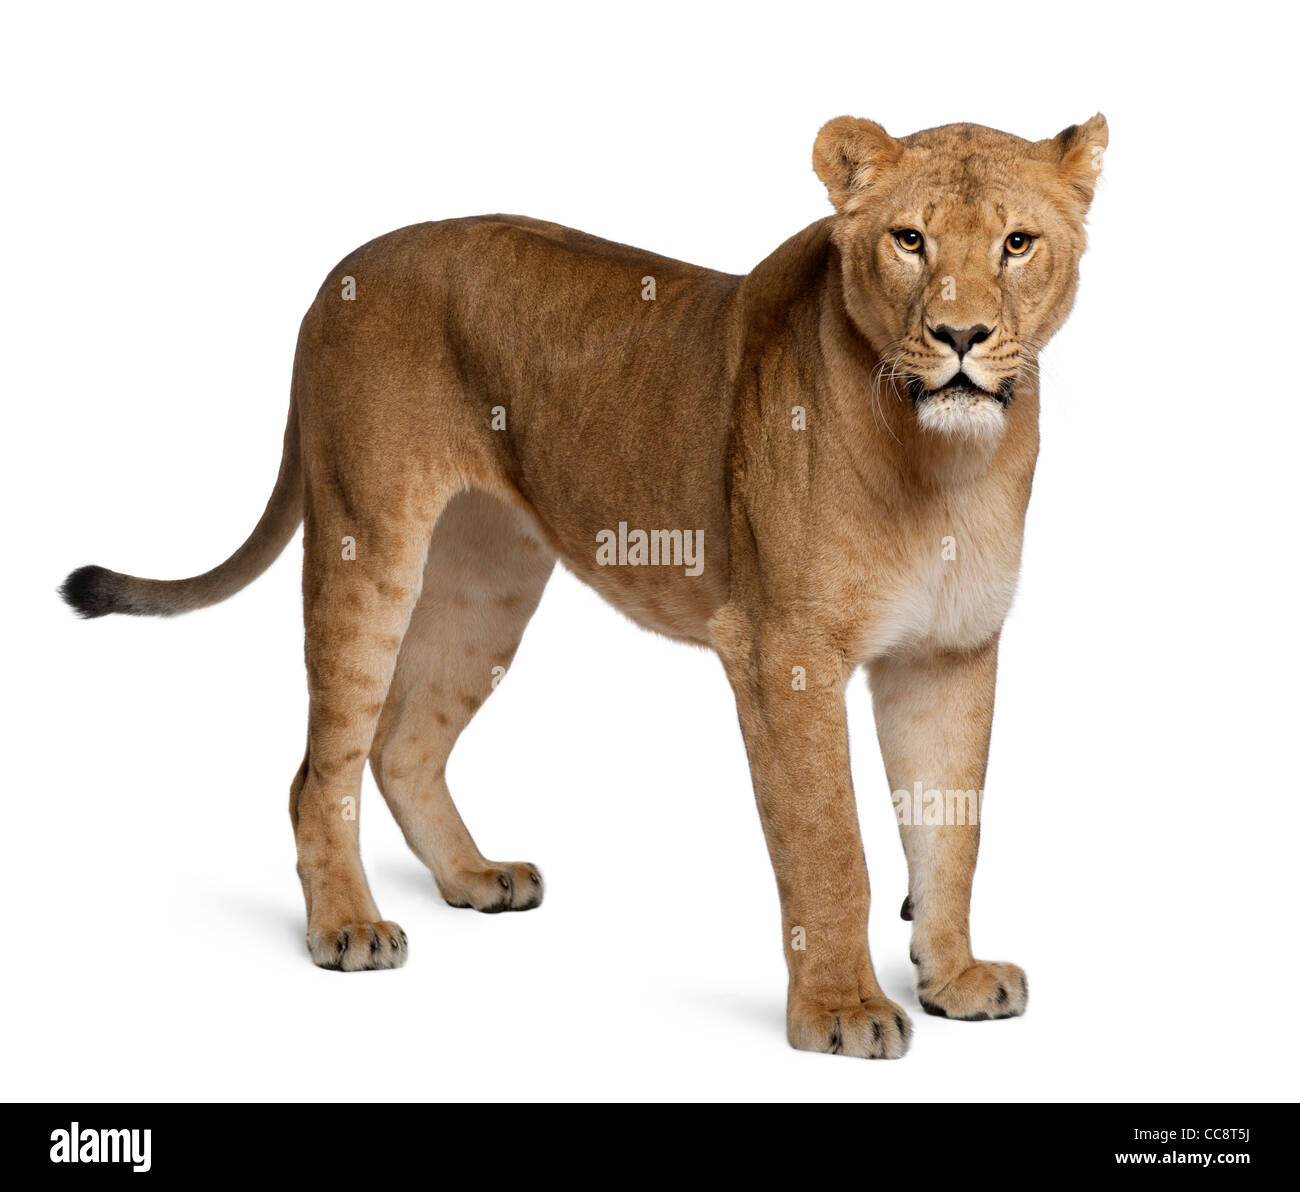 Lionne, Panthera leo, 3 ans, standing against white background Banque D'Images